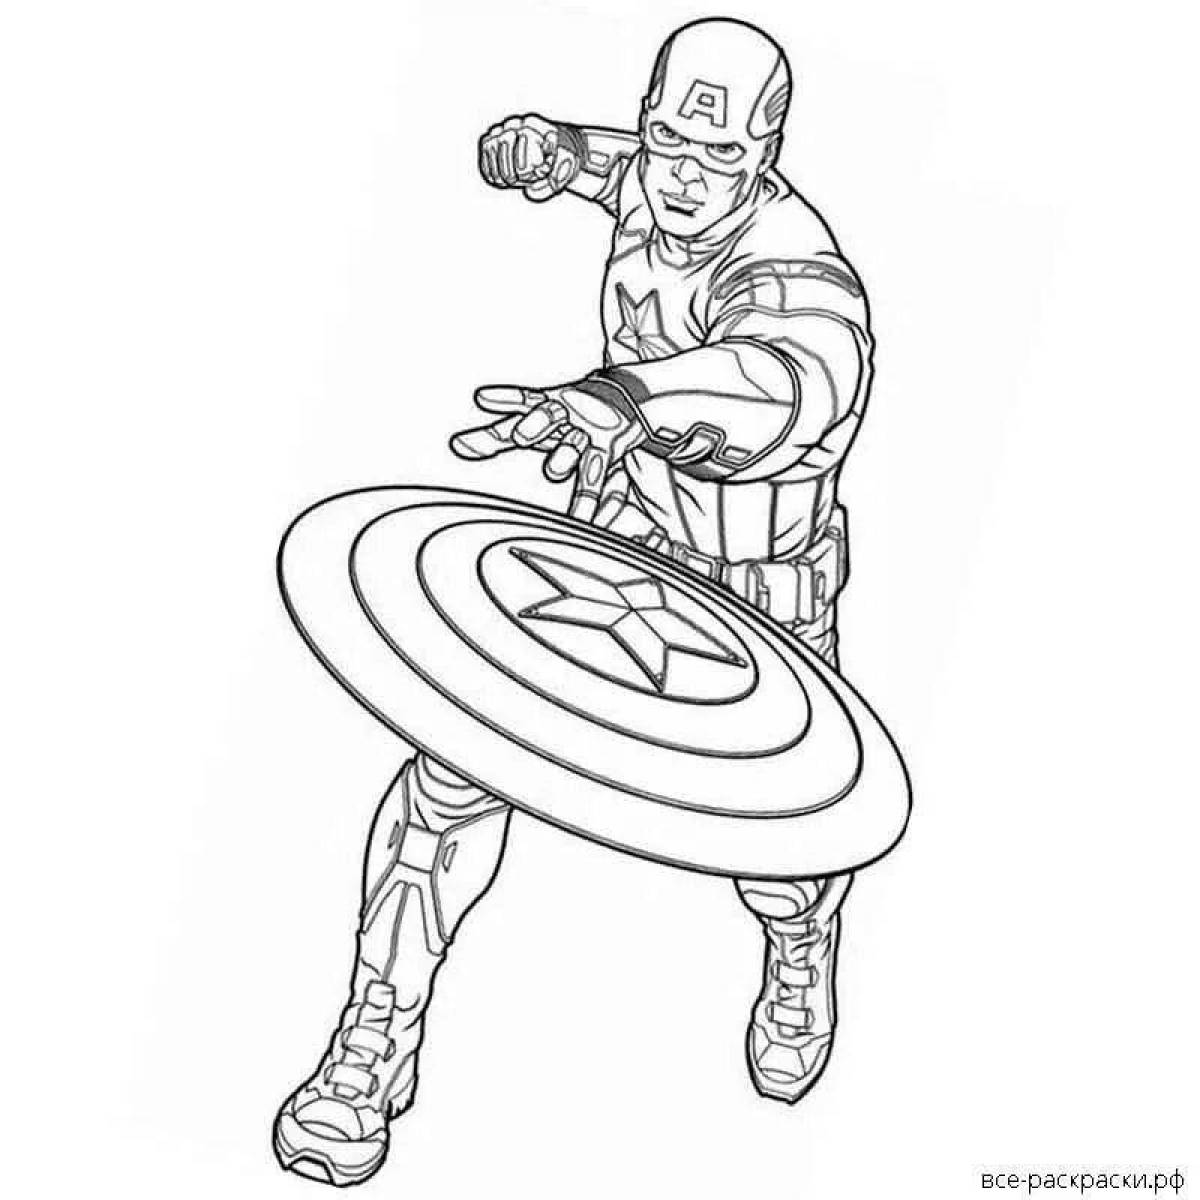 Captain America's shining shield coloring page